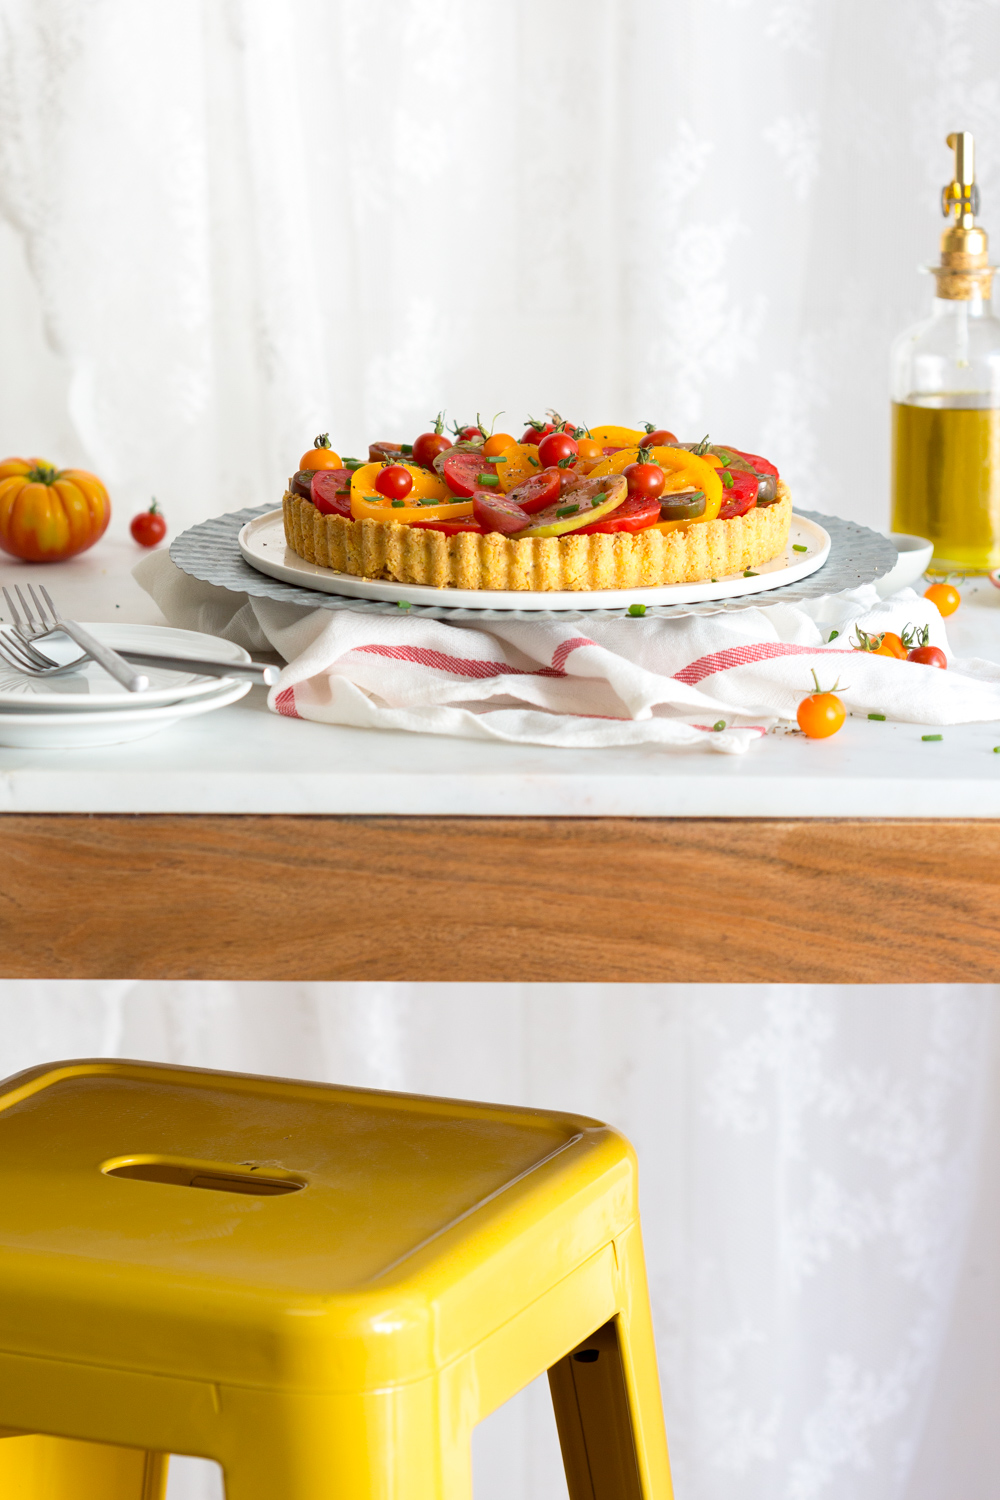 Table set with Heirloom Tomato and Pimento Cheese Tart with Cornmeal Crust